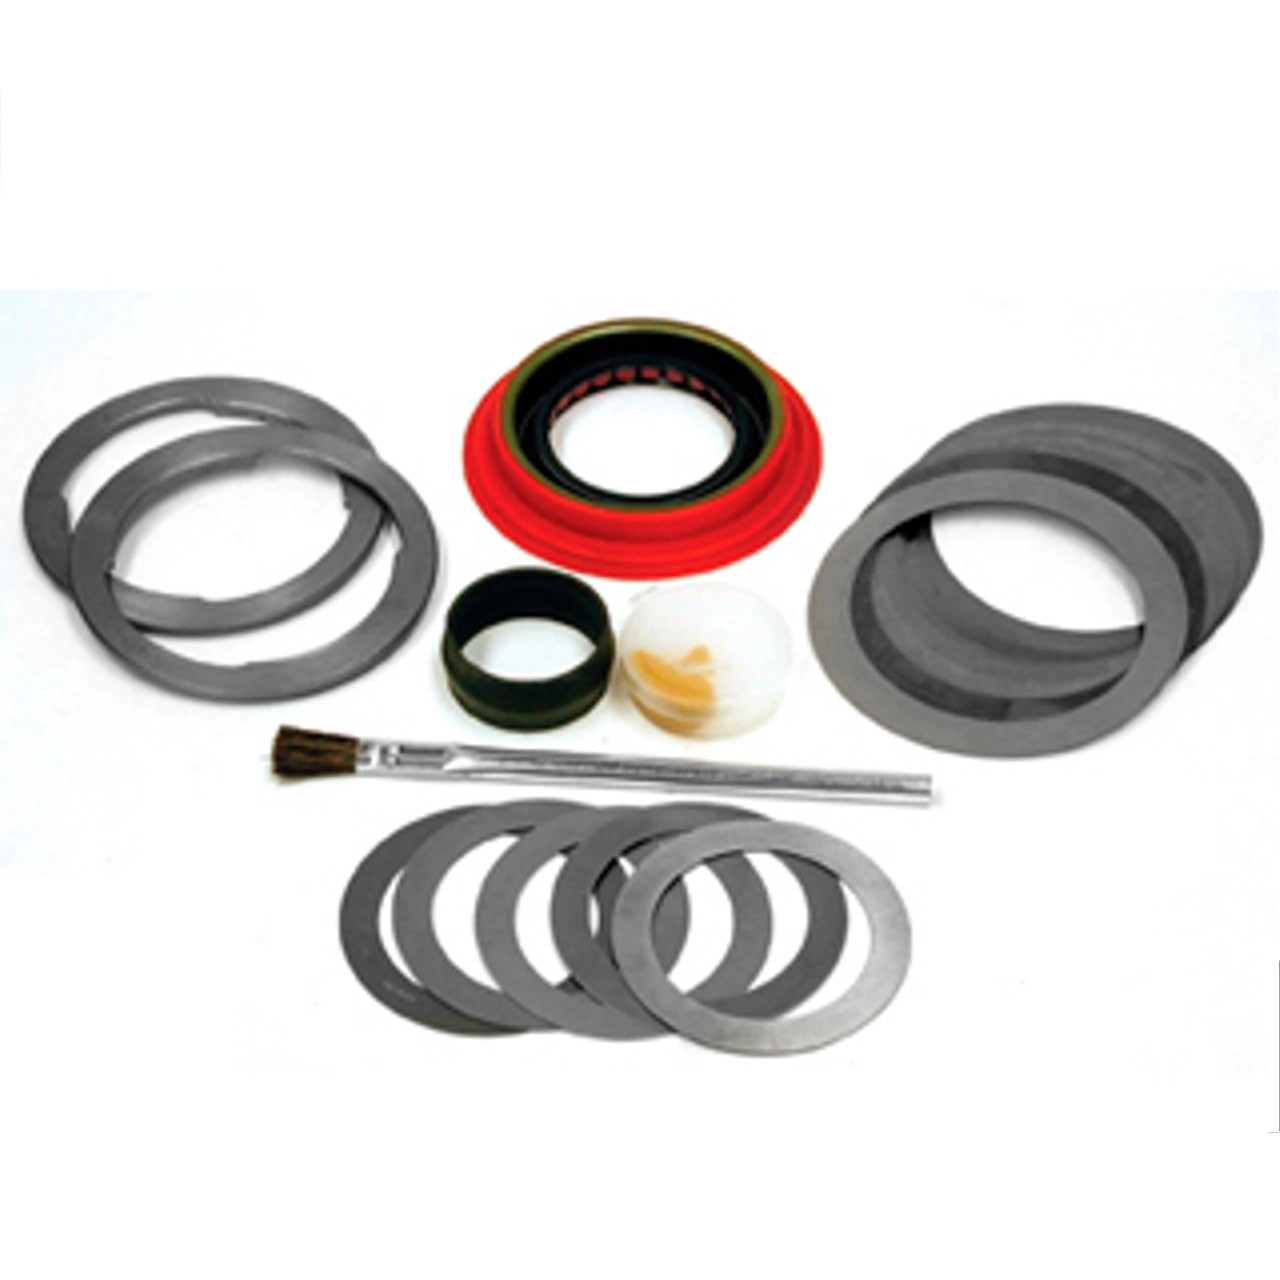 Yukon Minor install kit for Toyota V6 and T8 reverse differential (MK TV6)